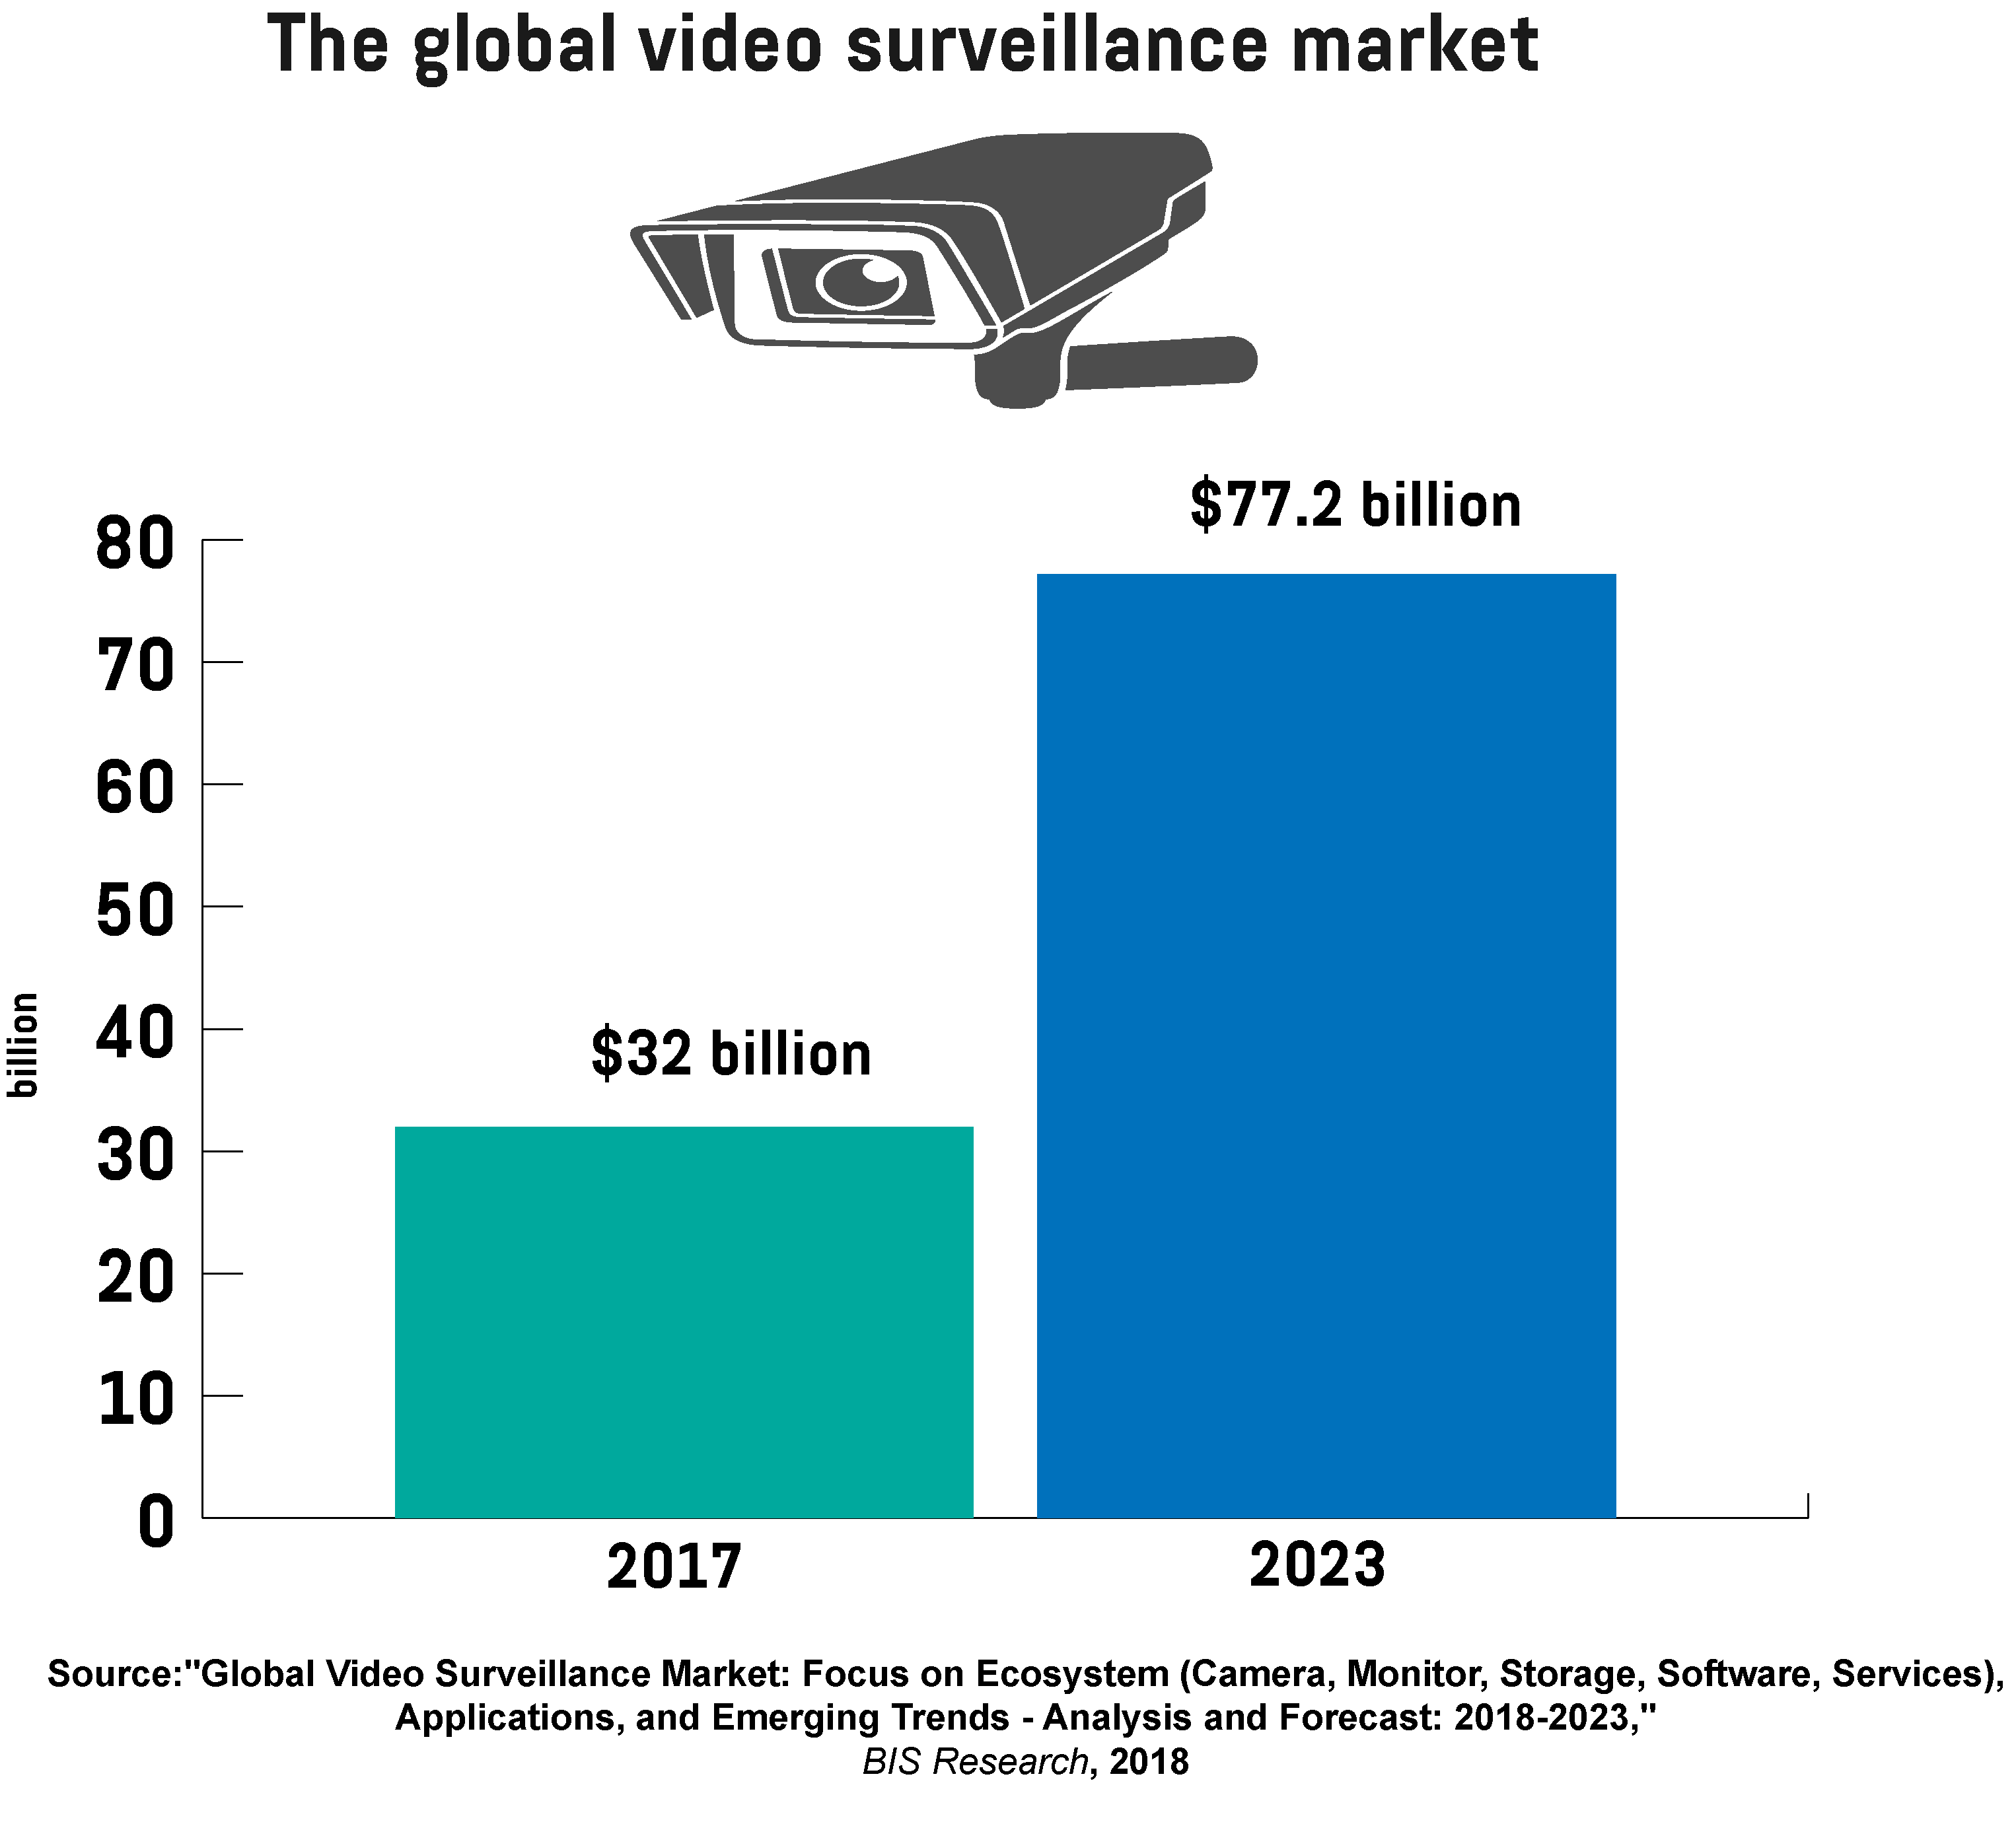  A graph showing the value of the global video surveillance market in 2017, and the predicted value in 2023.